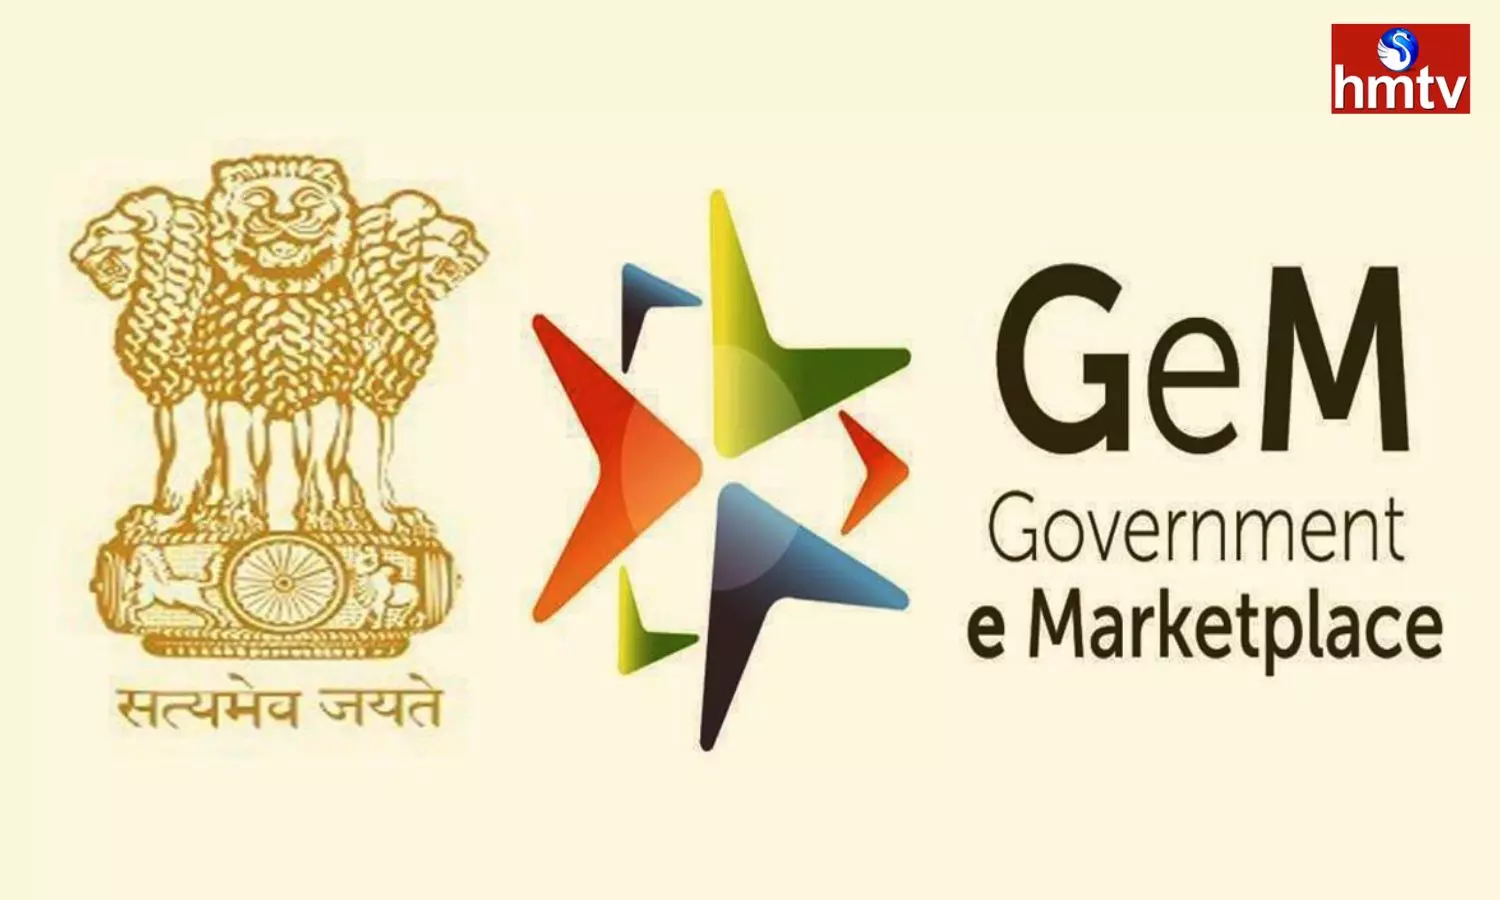 Gem Online Marketplace Selling Cheapest Products Compared To Amazon And Flipkart